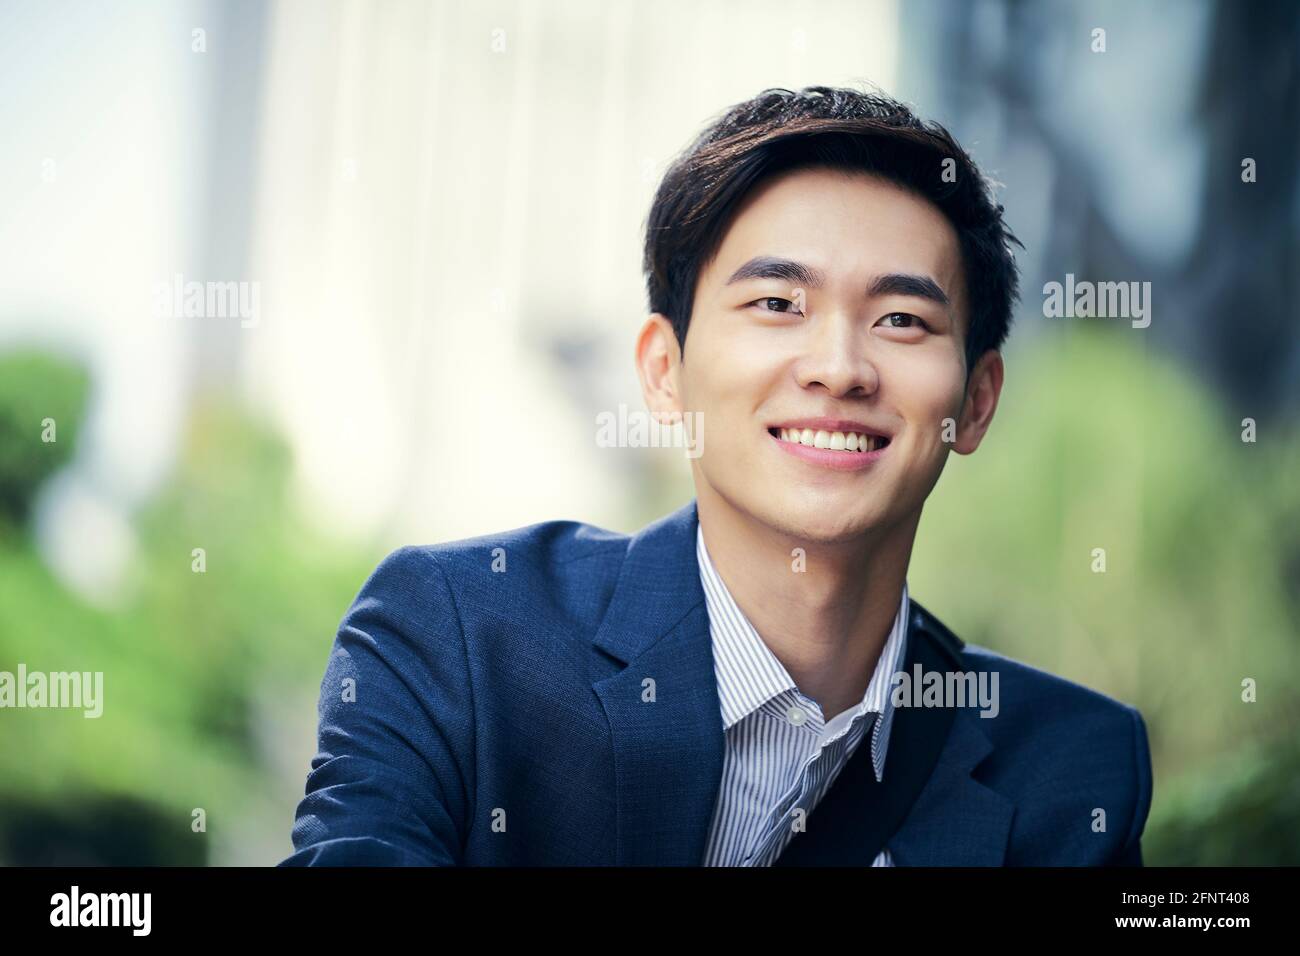 outdoor portrait of a successful asian business man happy and smiling Stock Photo